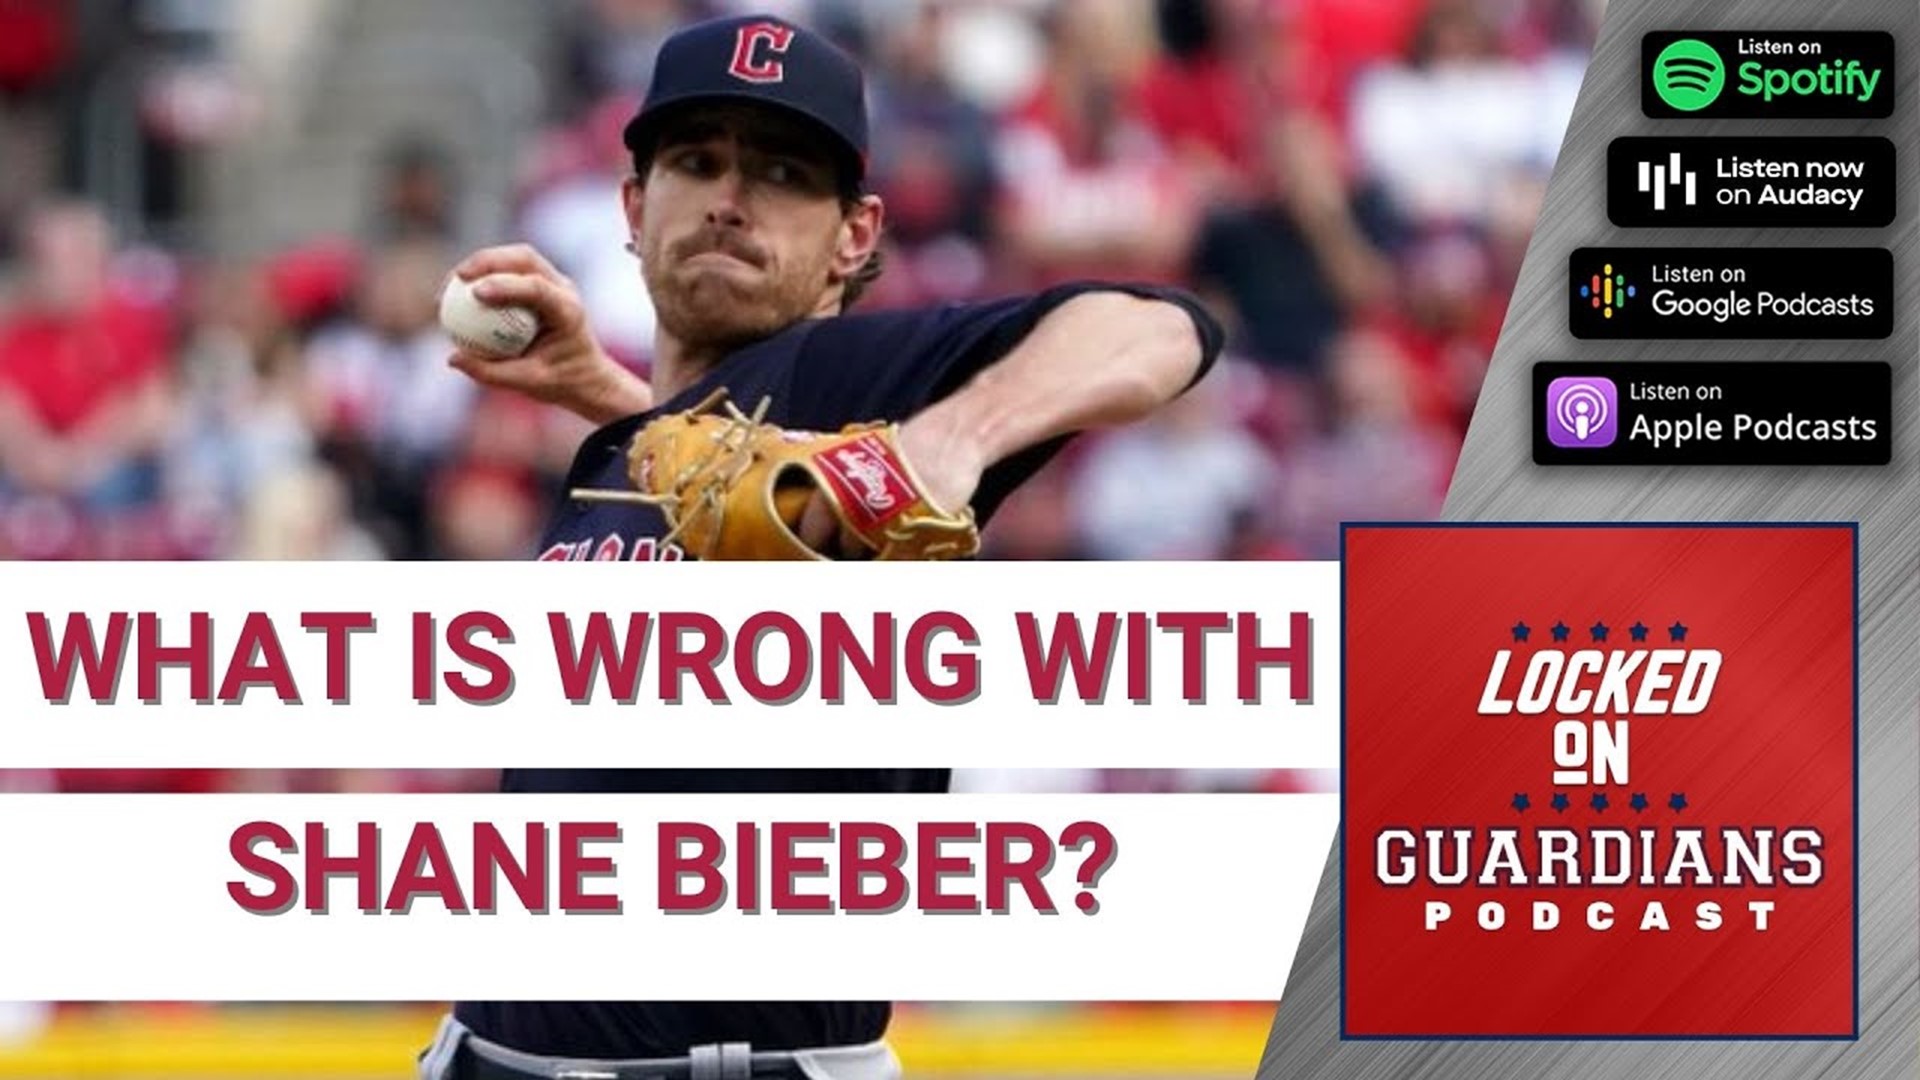 We discuss why there is no chance Shane Bieber would be traded any time soon. What could be wrong with him?